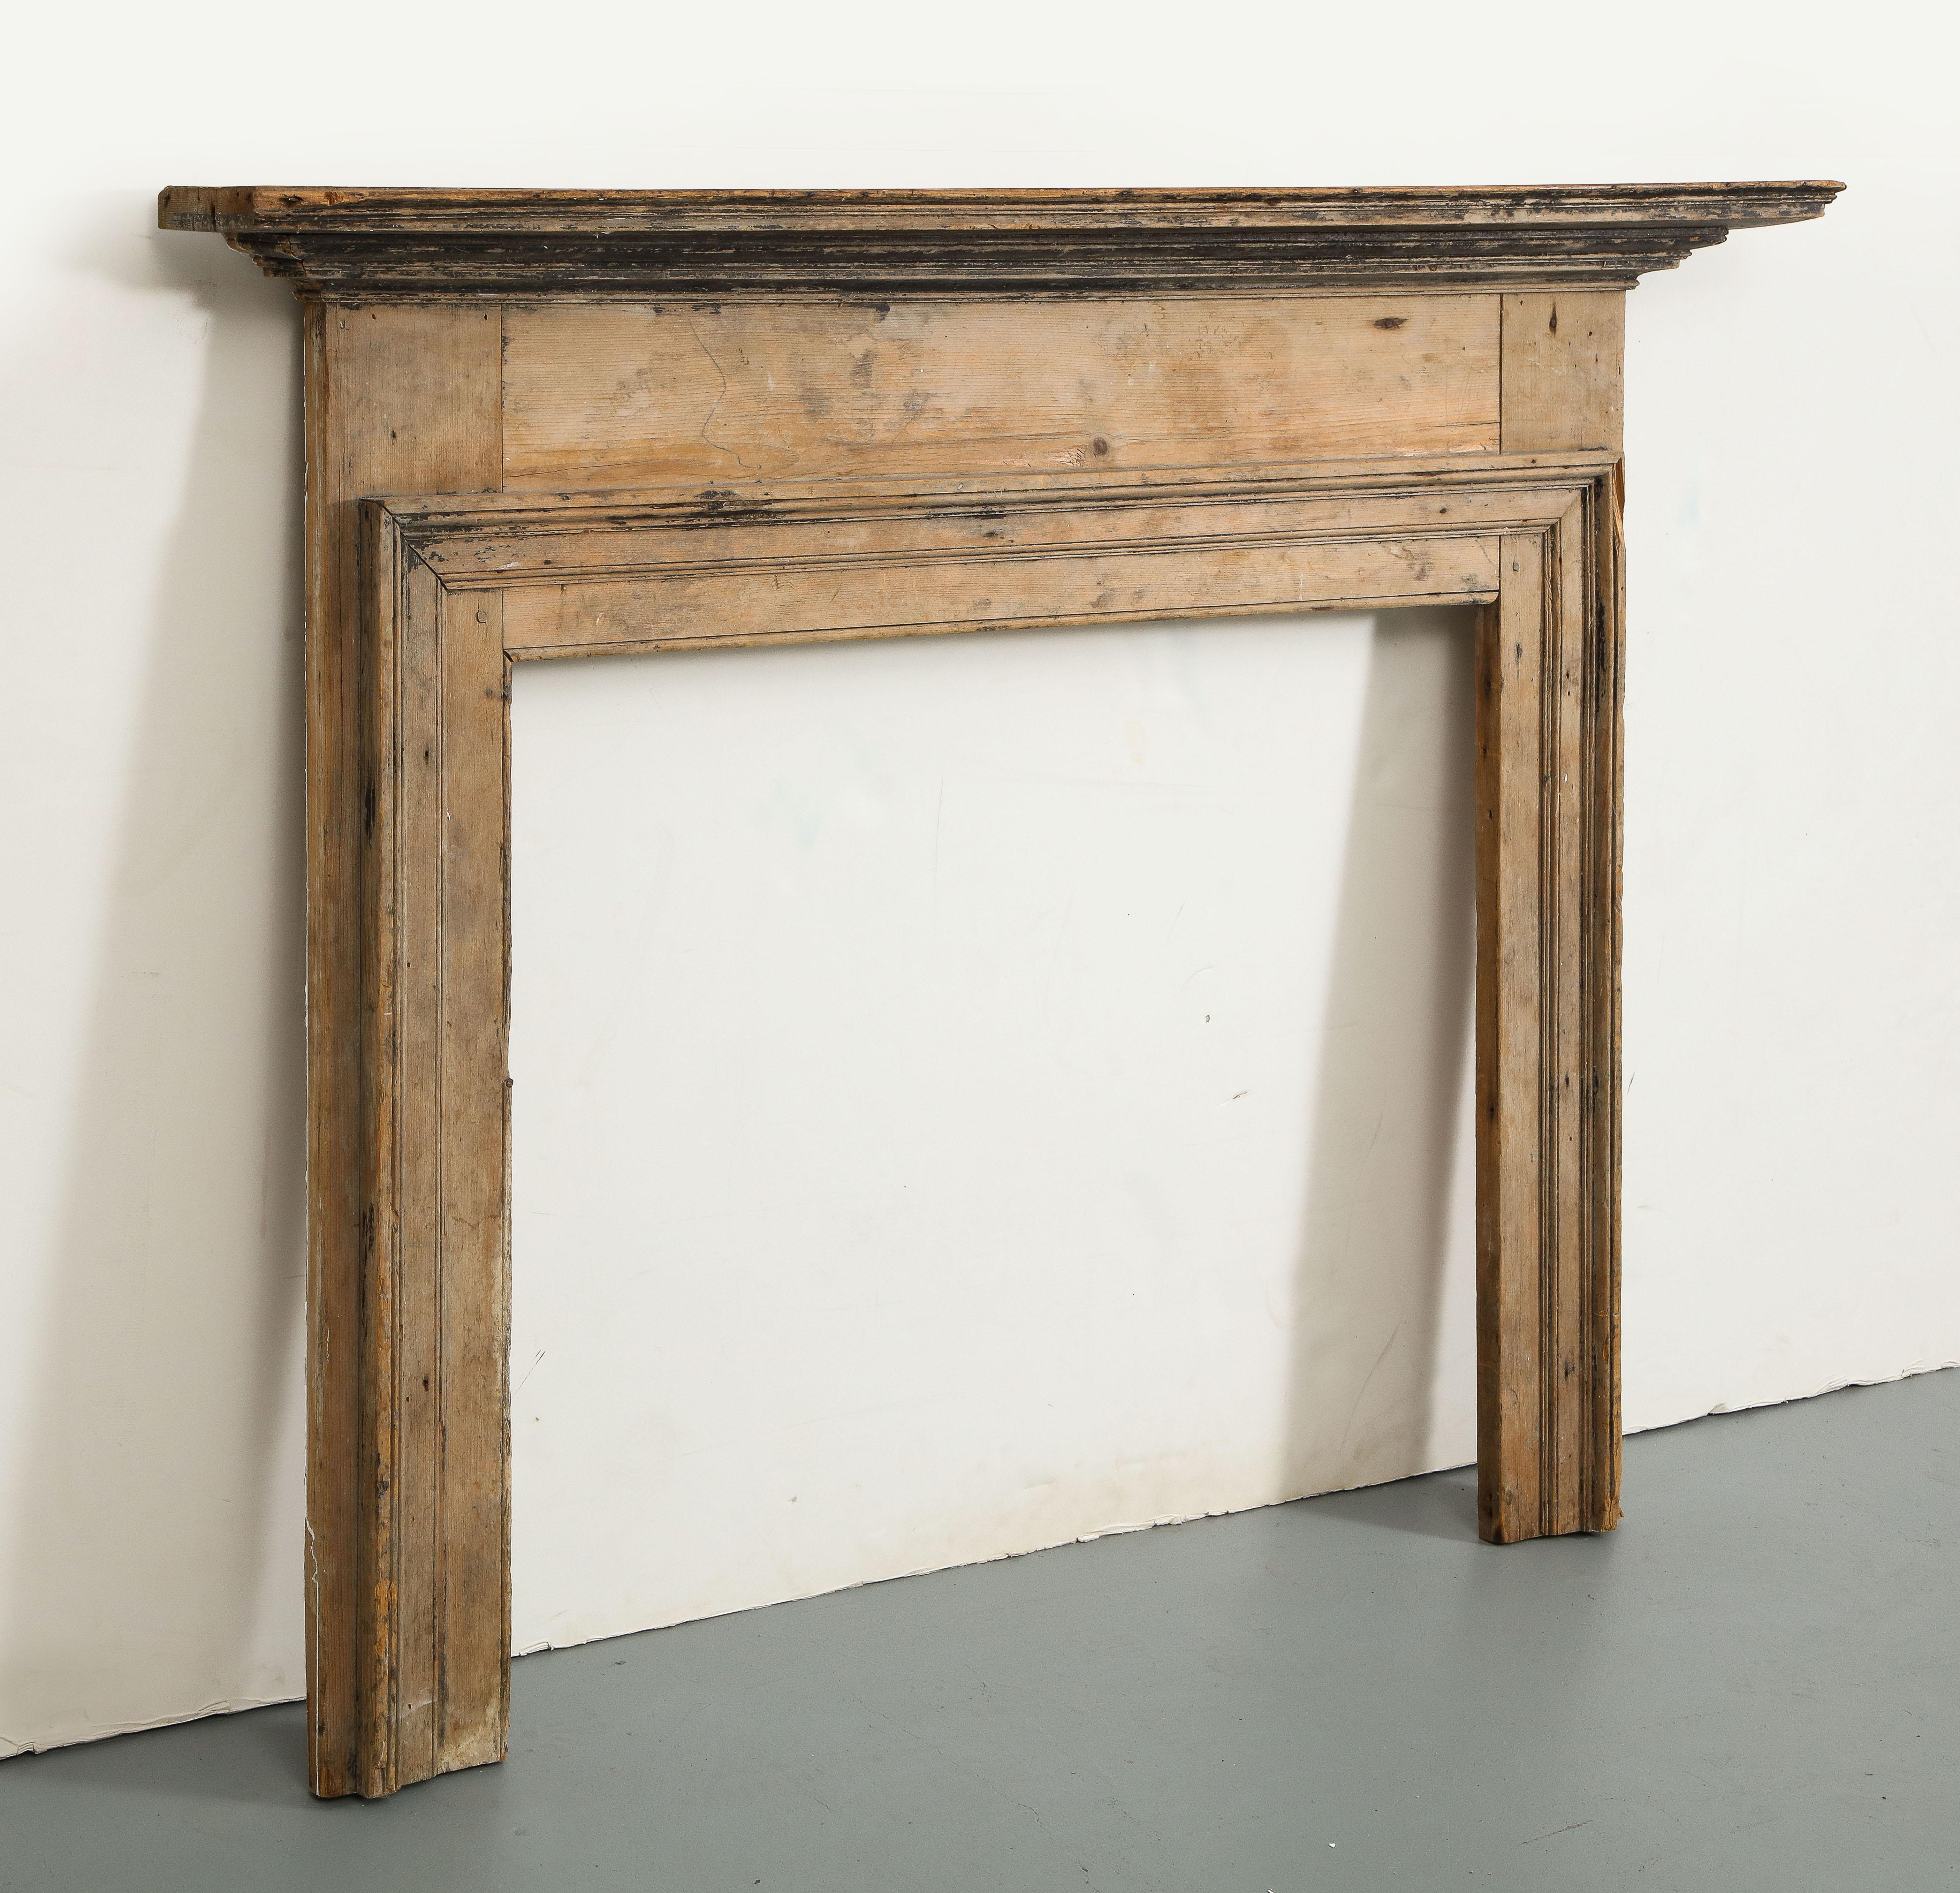 Rustic farmhouse style 19th century English pine fireplace mantel. Moulding details around firebox.

Opening is 37.5